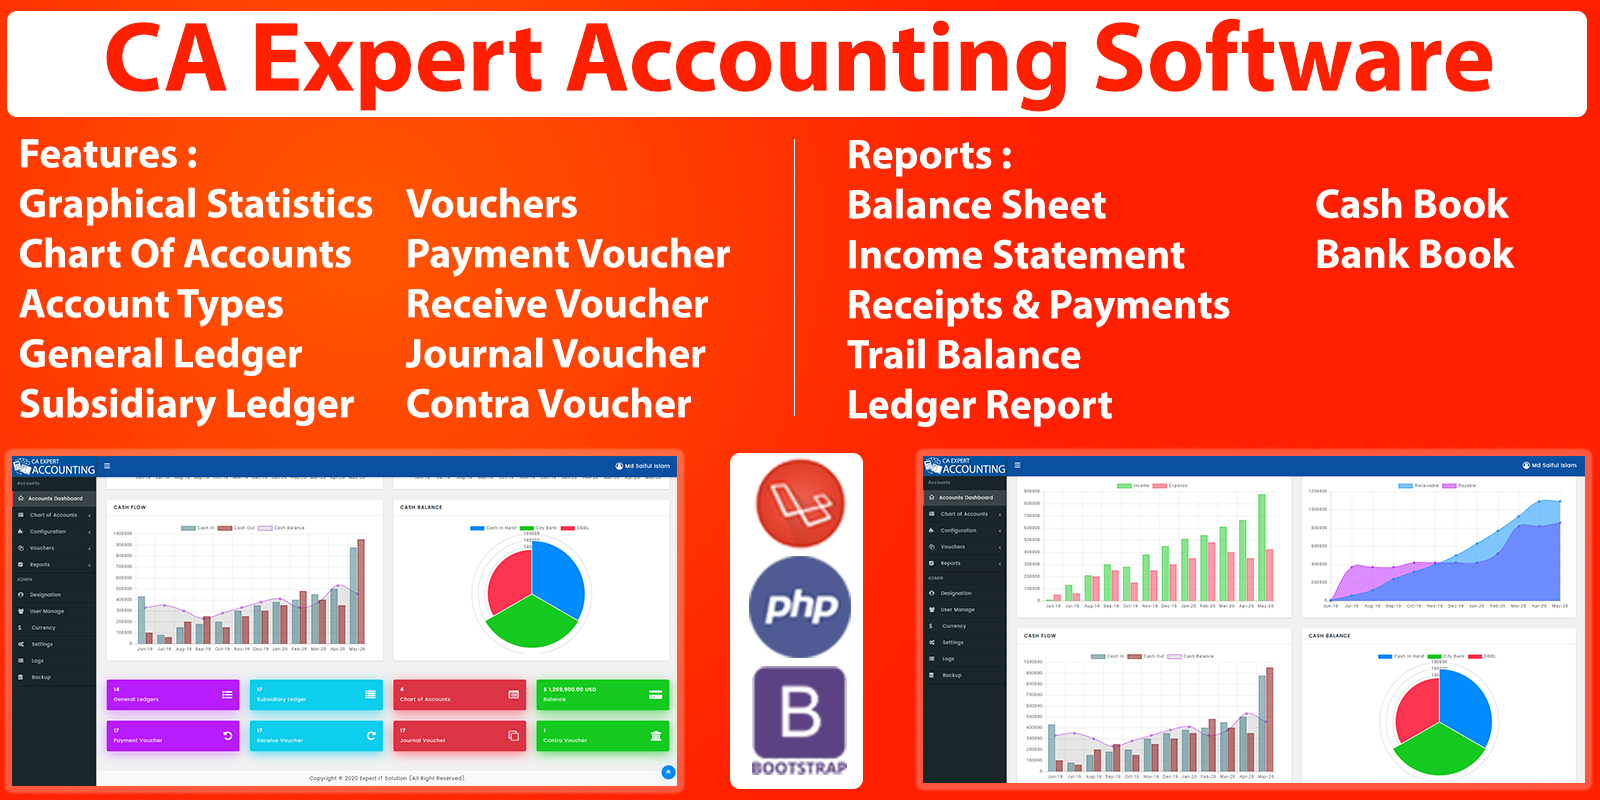 CA Expert Accounting Software